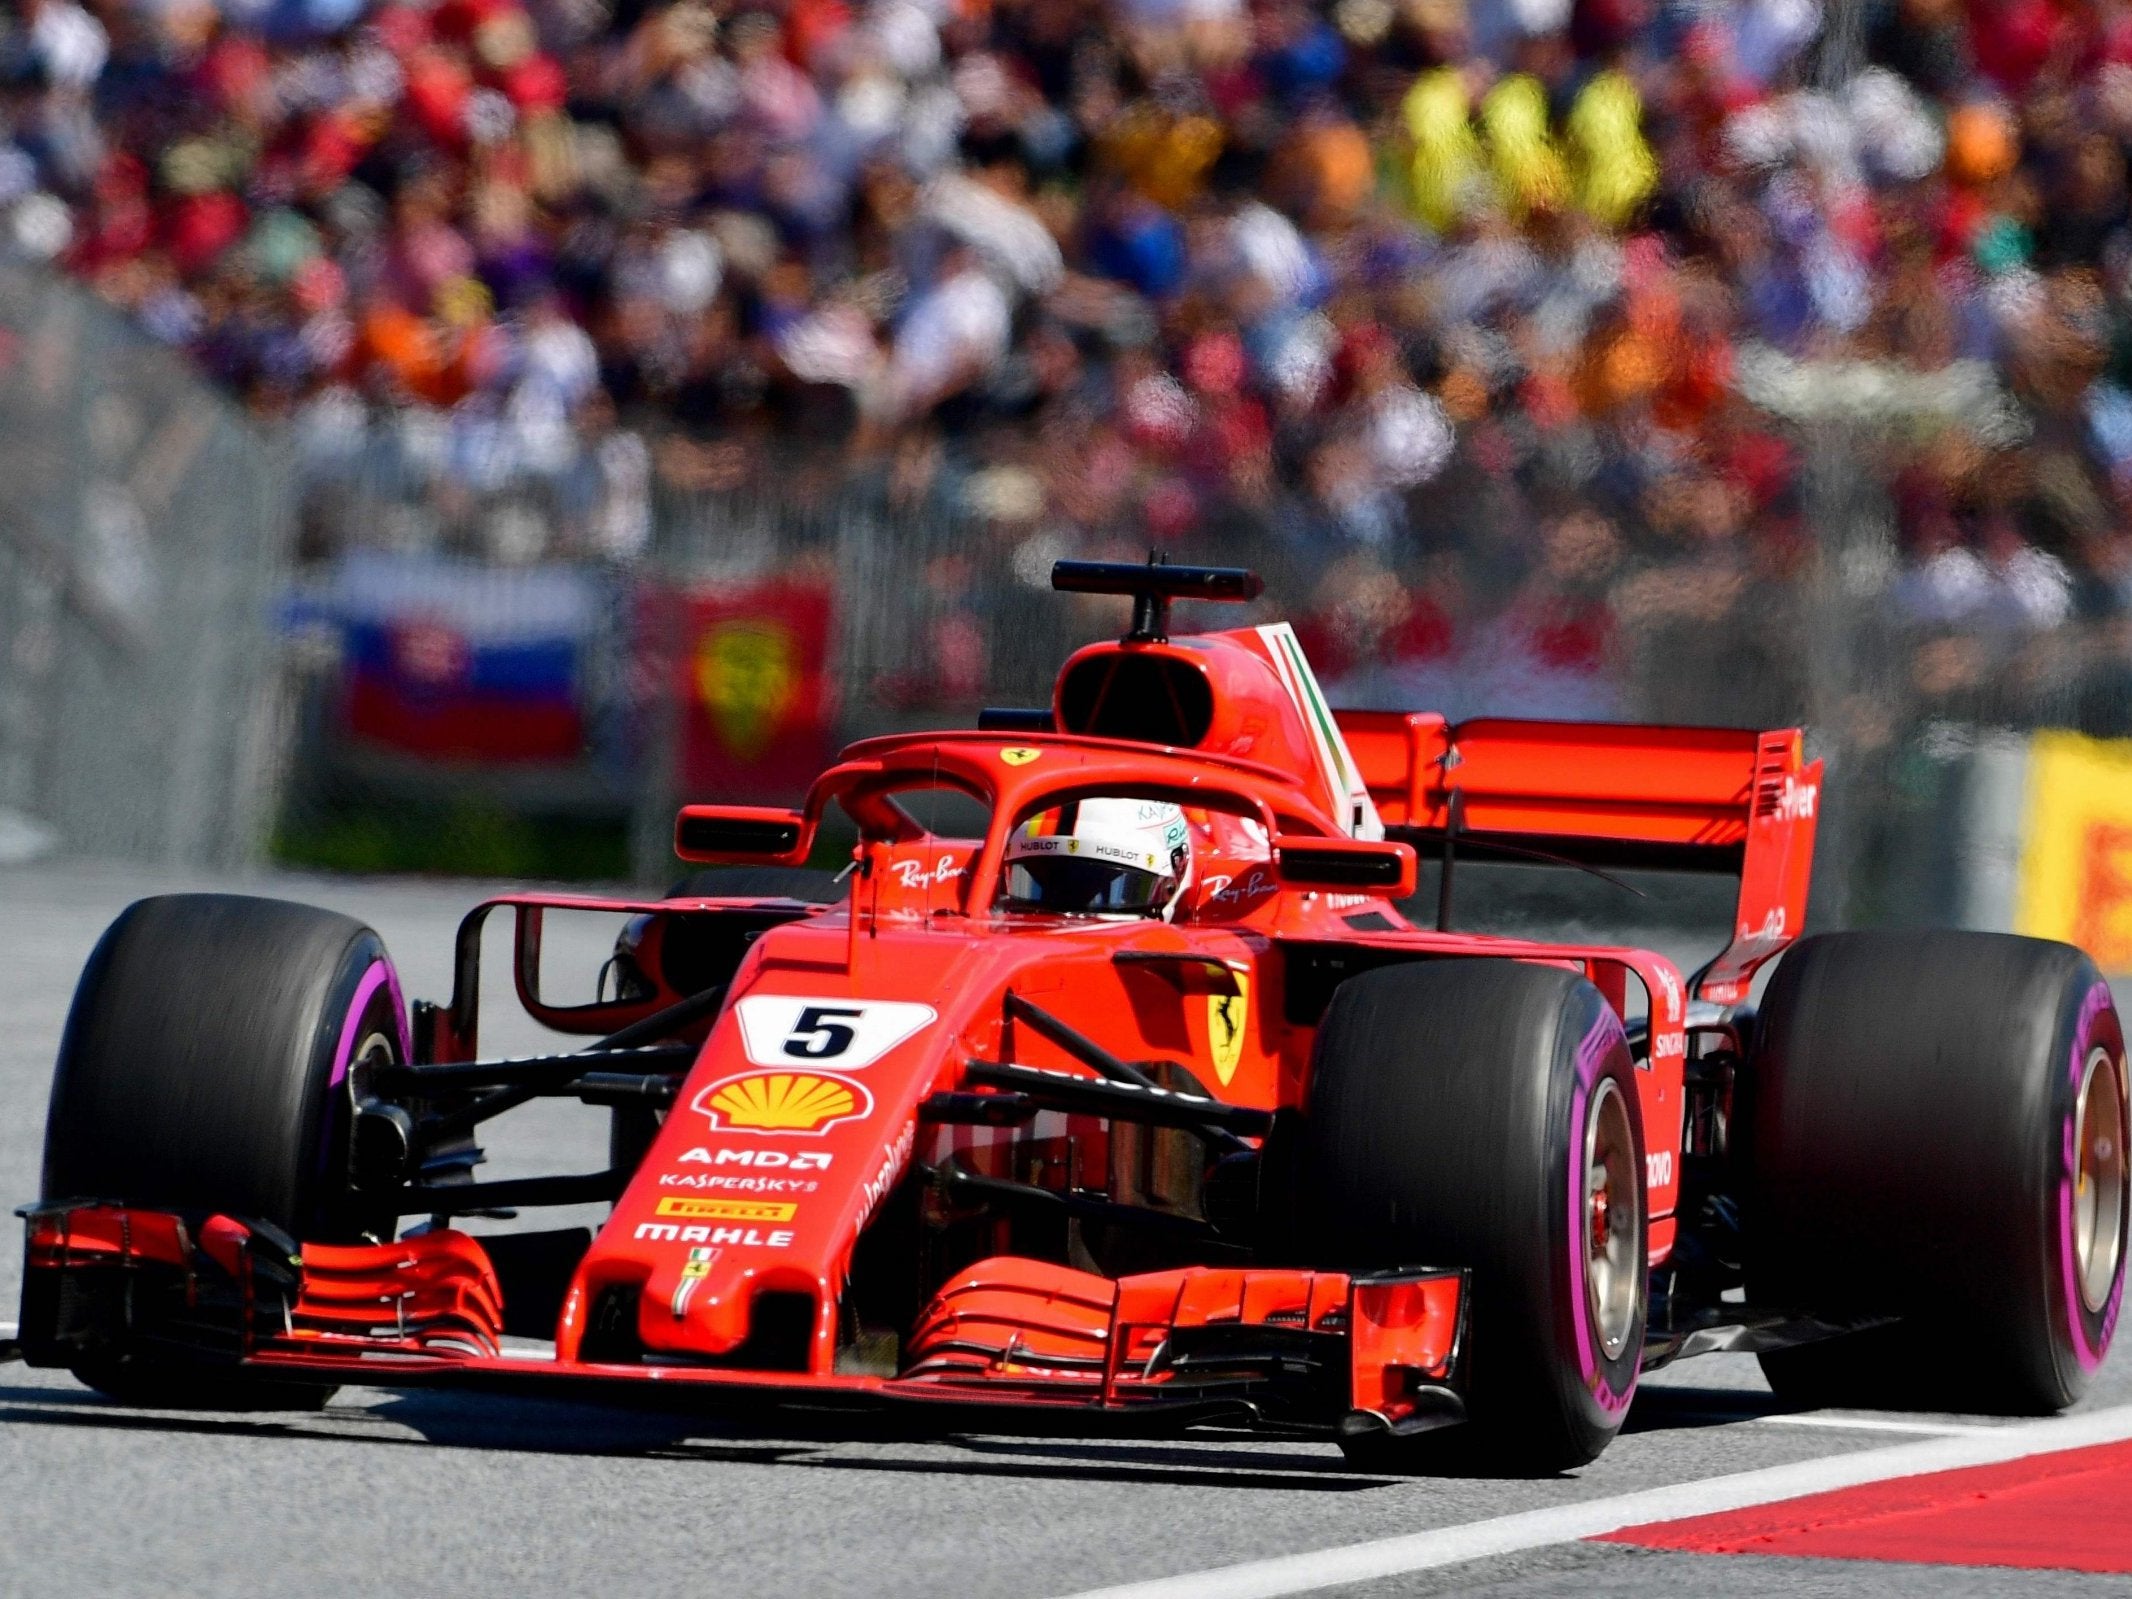 Vettel takes the championship lead to Silverstone for next week's British Grand Prix